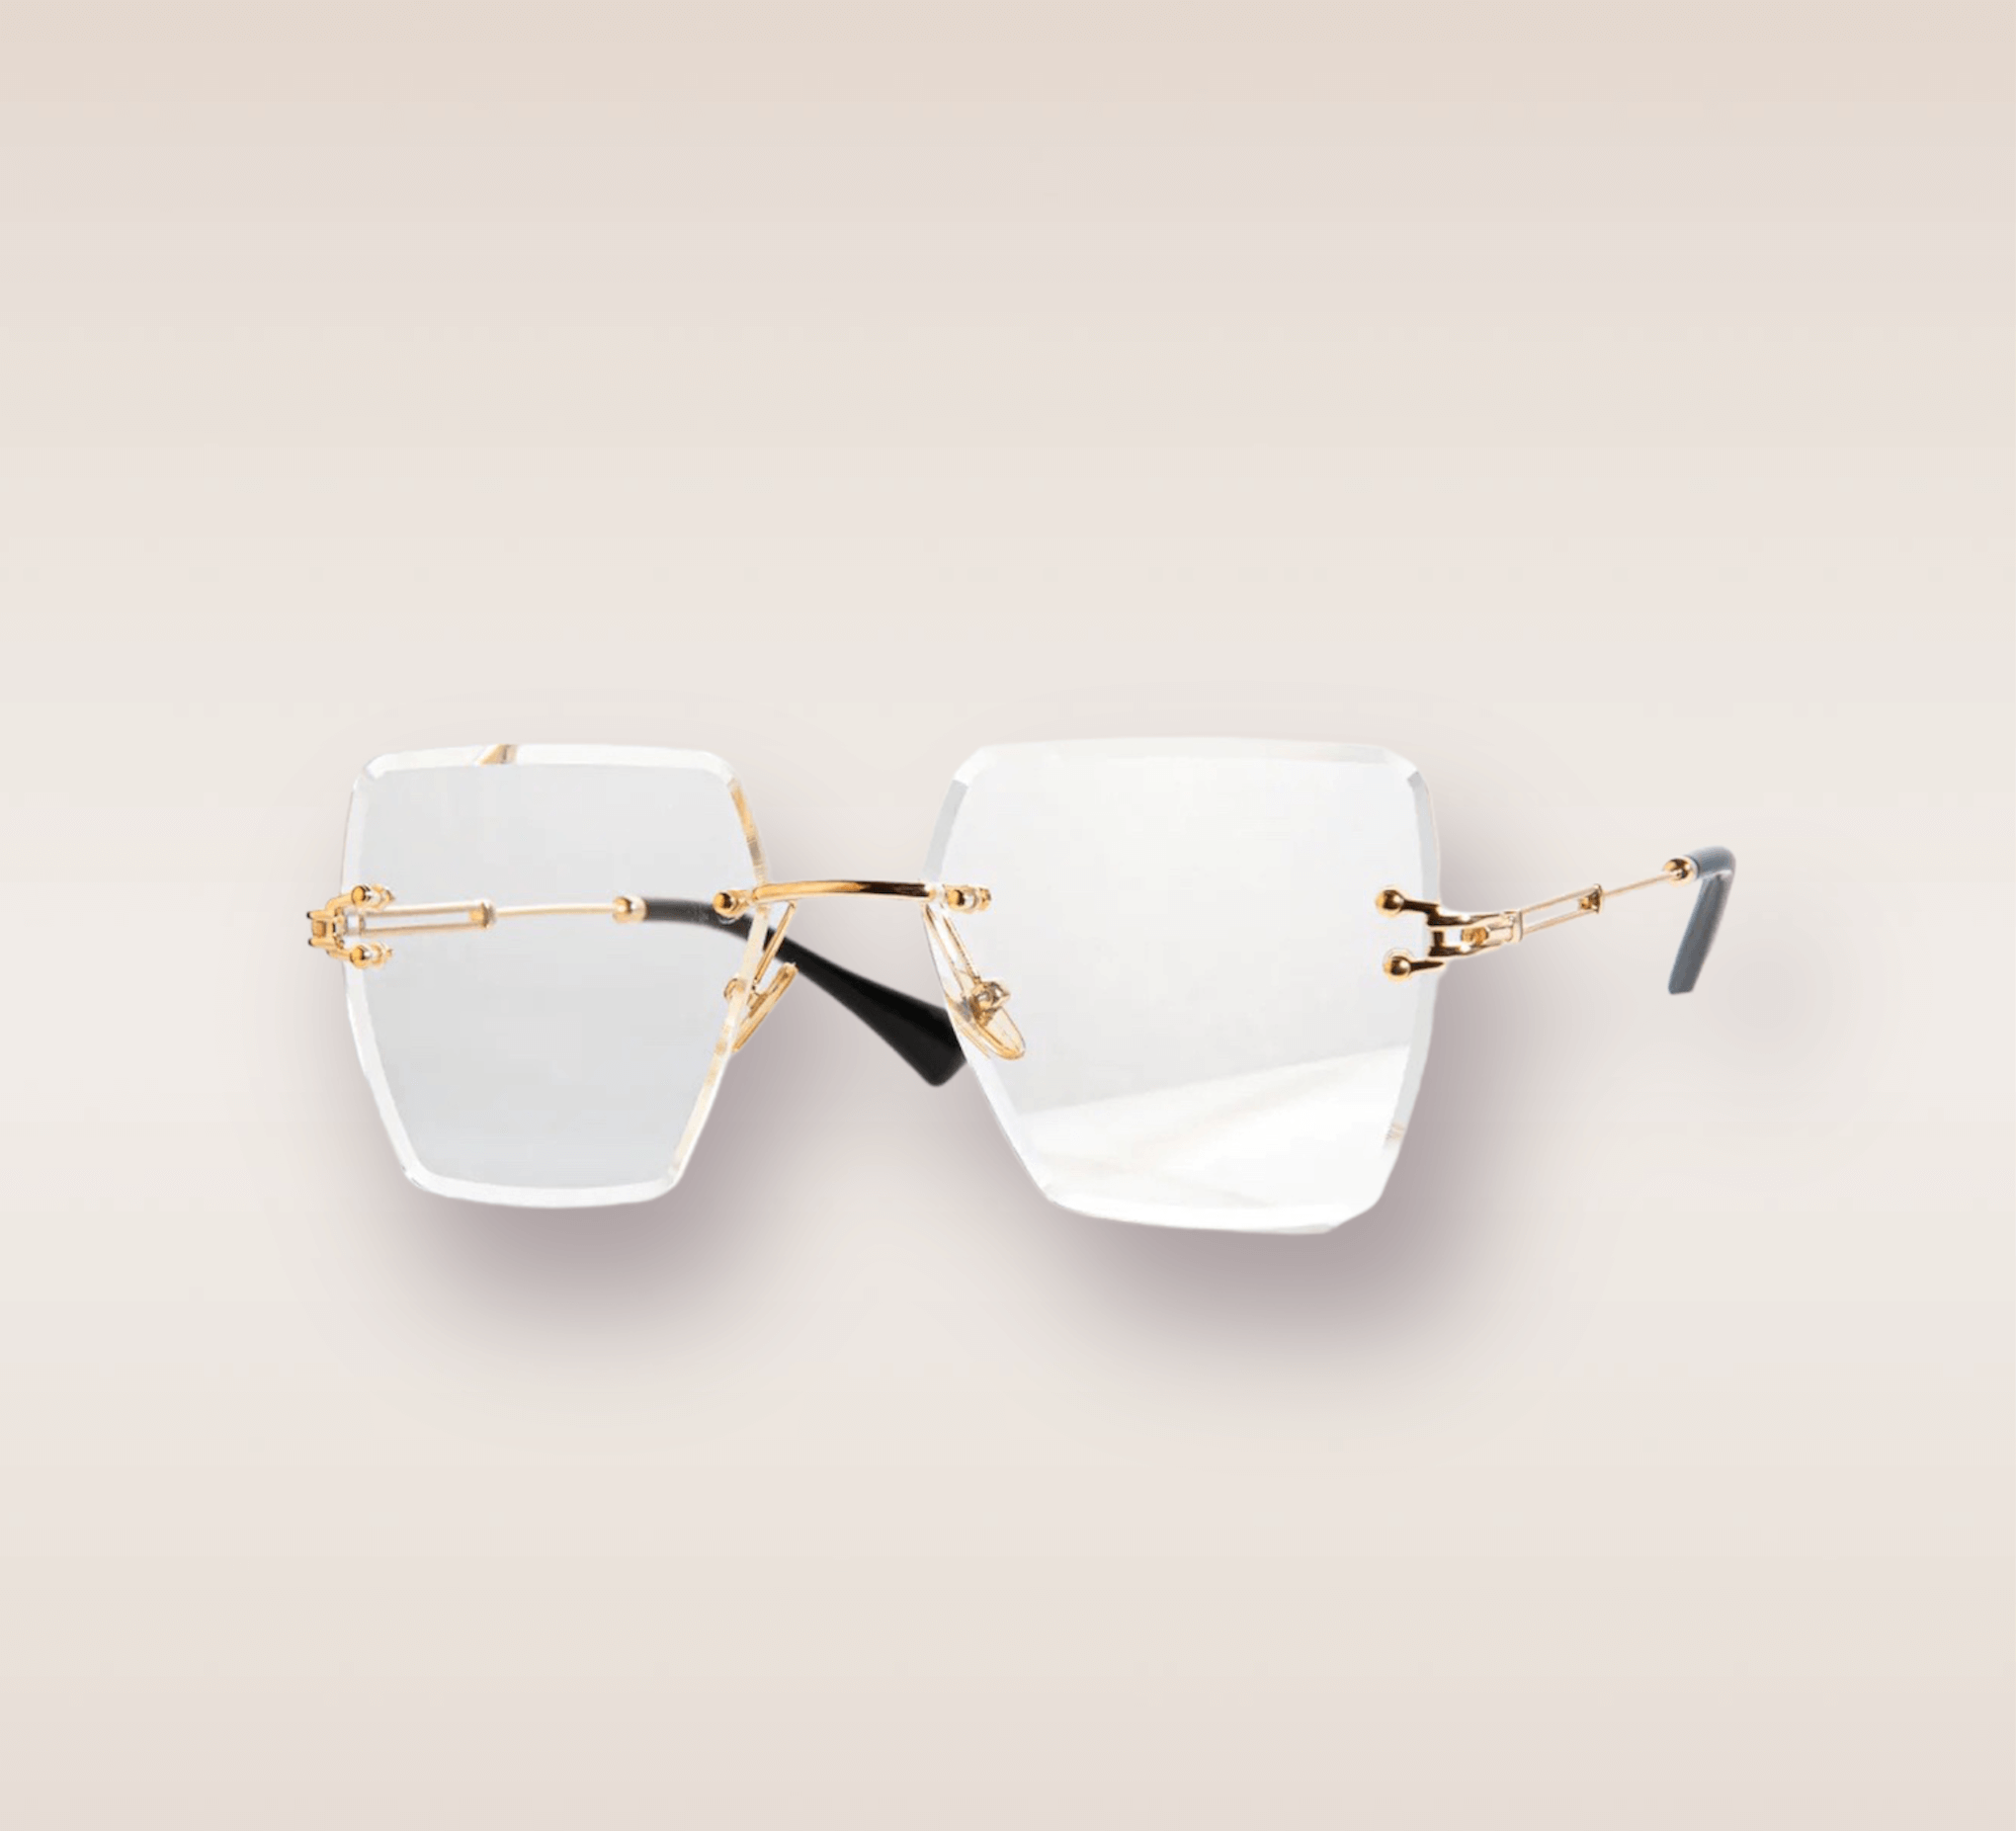 In this up-close shot, we are introduced to the captivating Casper frames, a stylish and sophisticated eyewear option. The rimless frames feature a mesmerizing clear gradient hue. The gold arms add a touch of opulence and refinement, complimenting the clear lens with a warm metallic accent. These frames are a true fashion statement, combining modern design with a touch of luxury. 